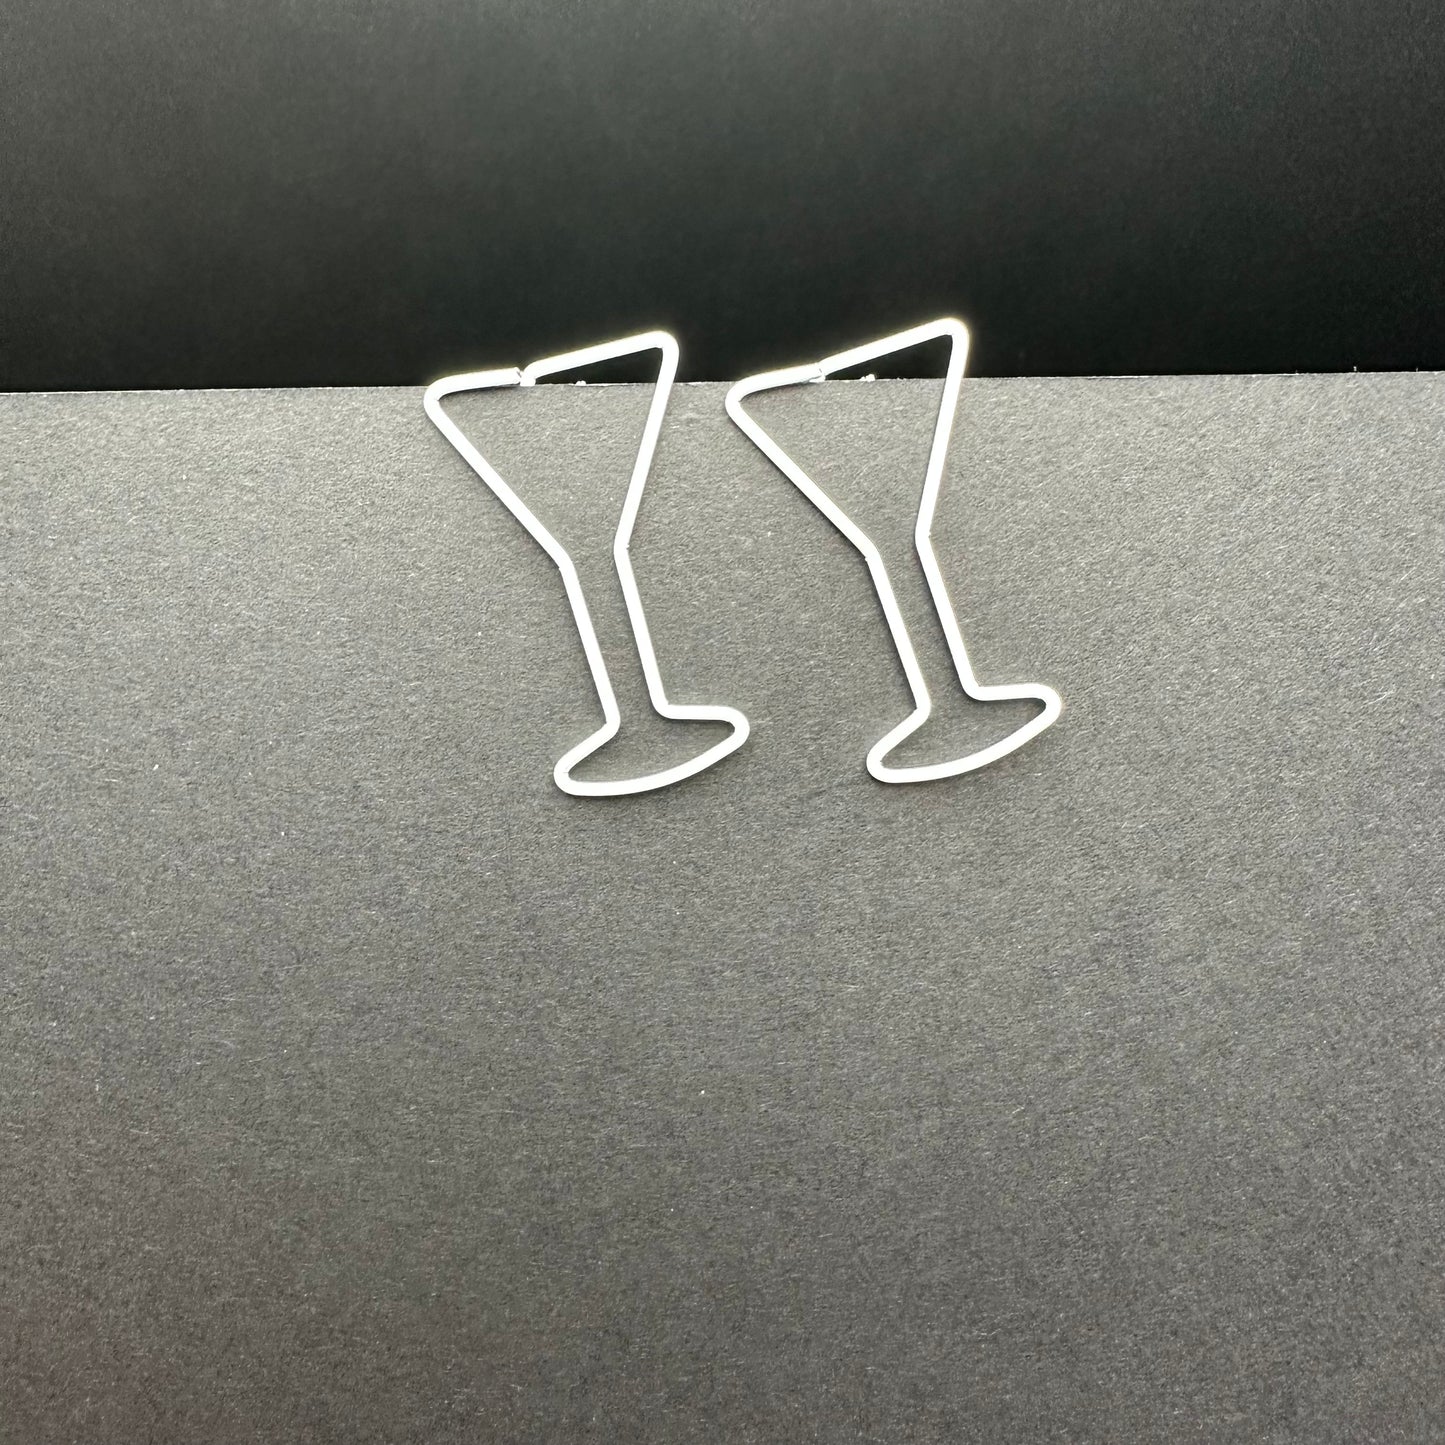 Two martini paperclips clipped on piece of paper.